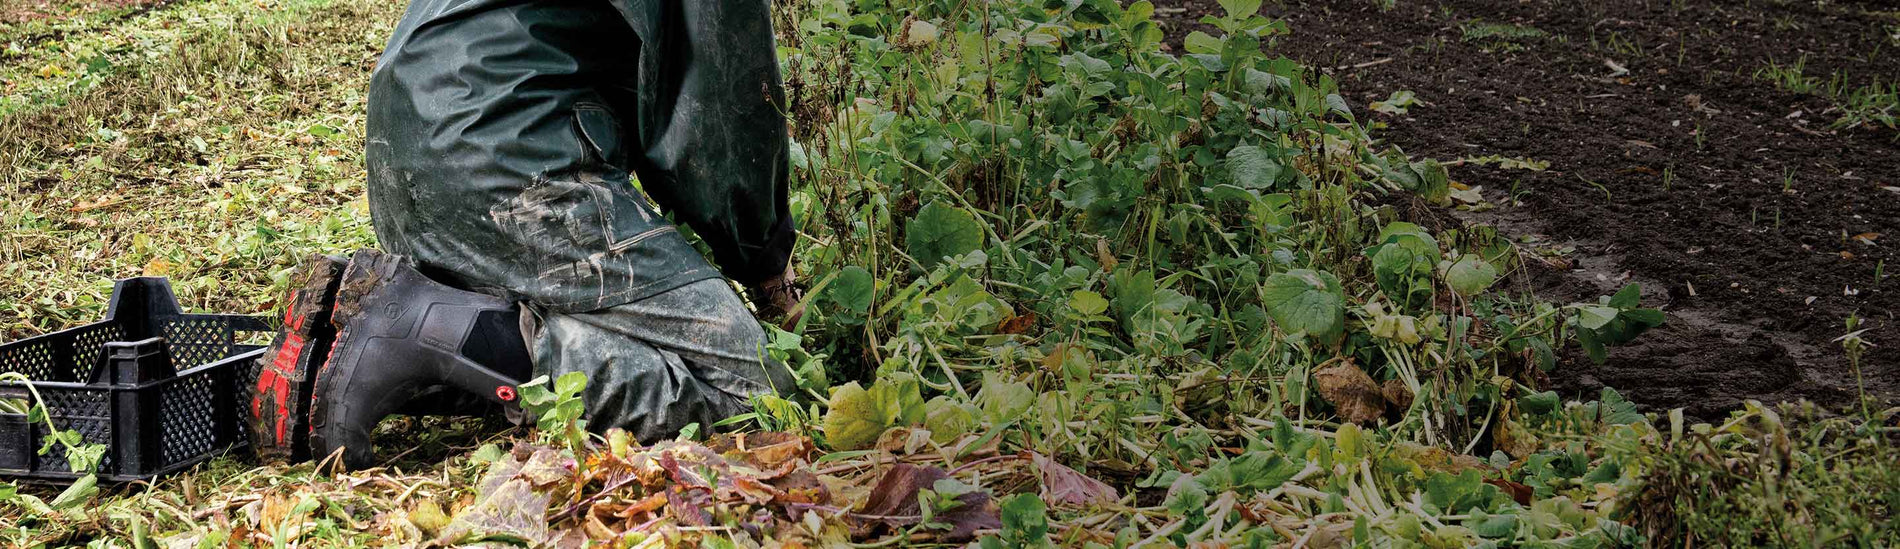 Close up image of someone gardening, wearing a pair of Dunlop Snugboot Wellingtons